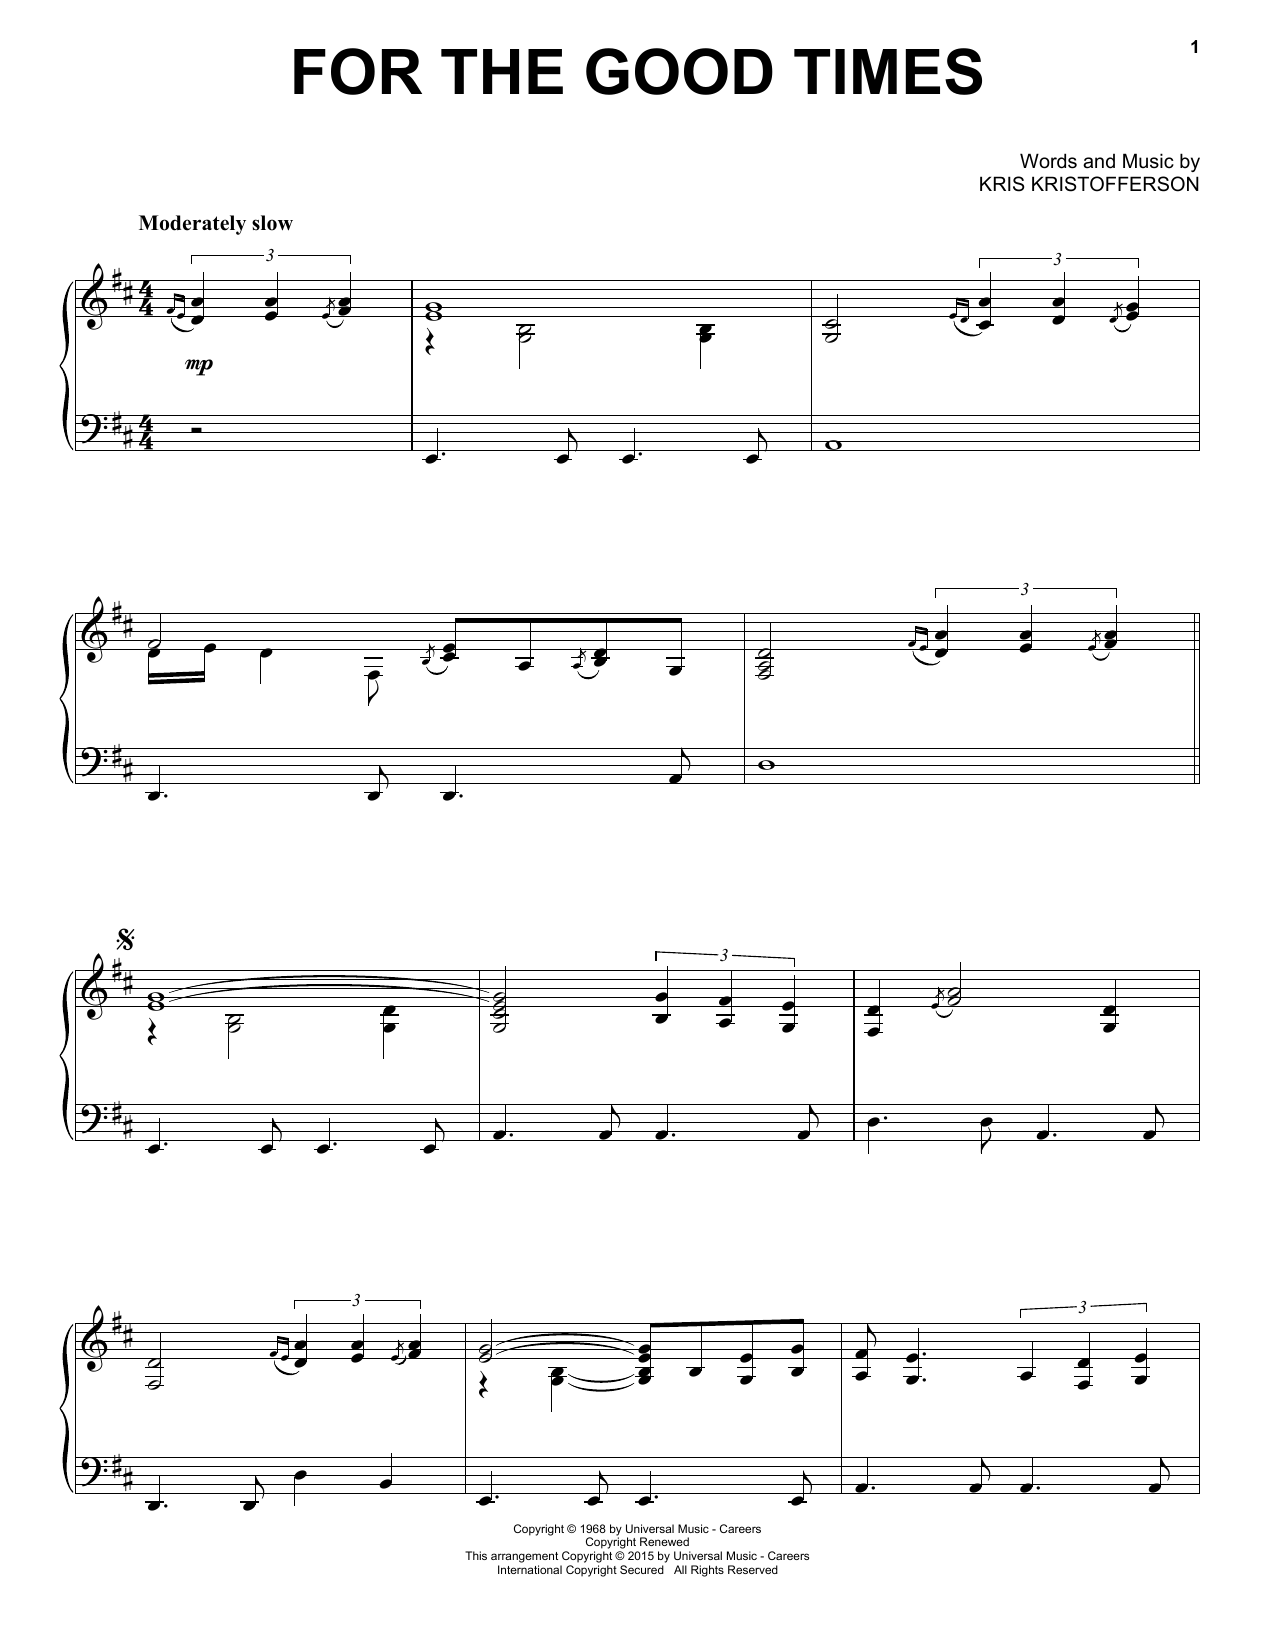 Download Kris Kristofferson For The Good Times Sheet Music